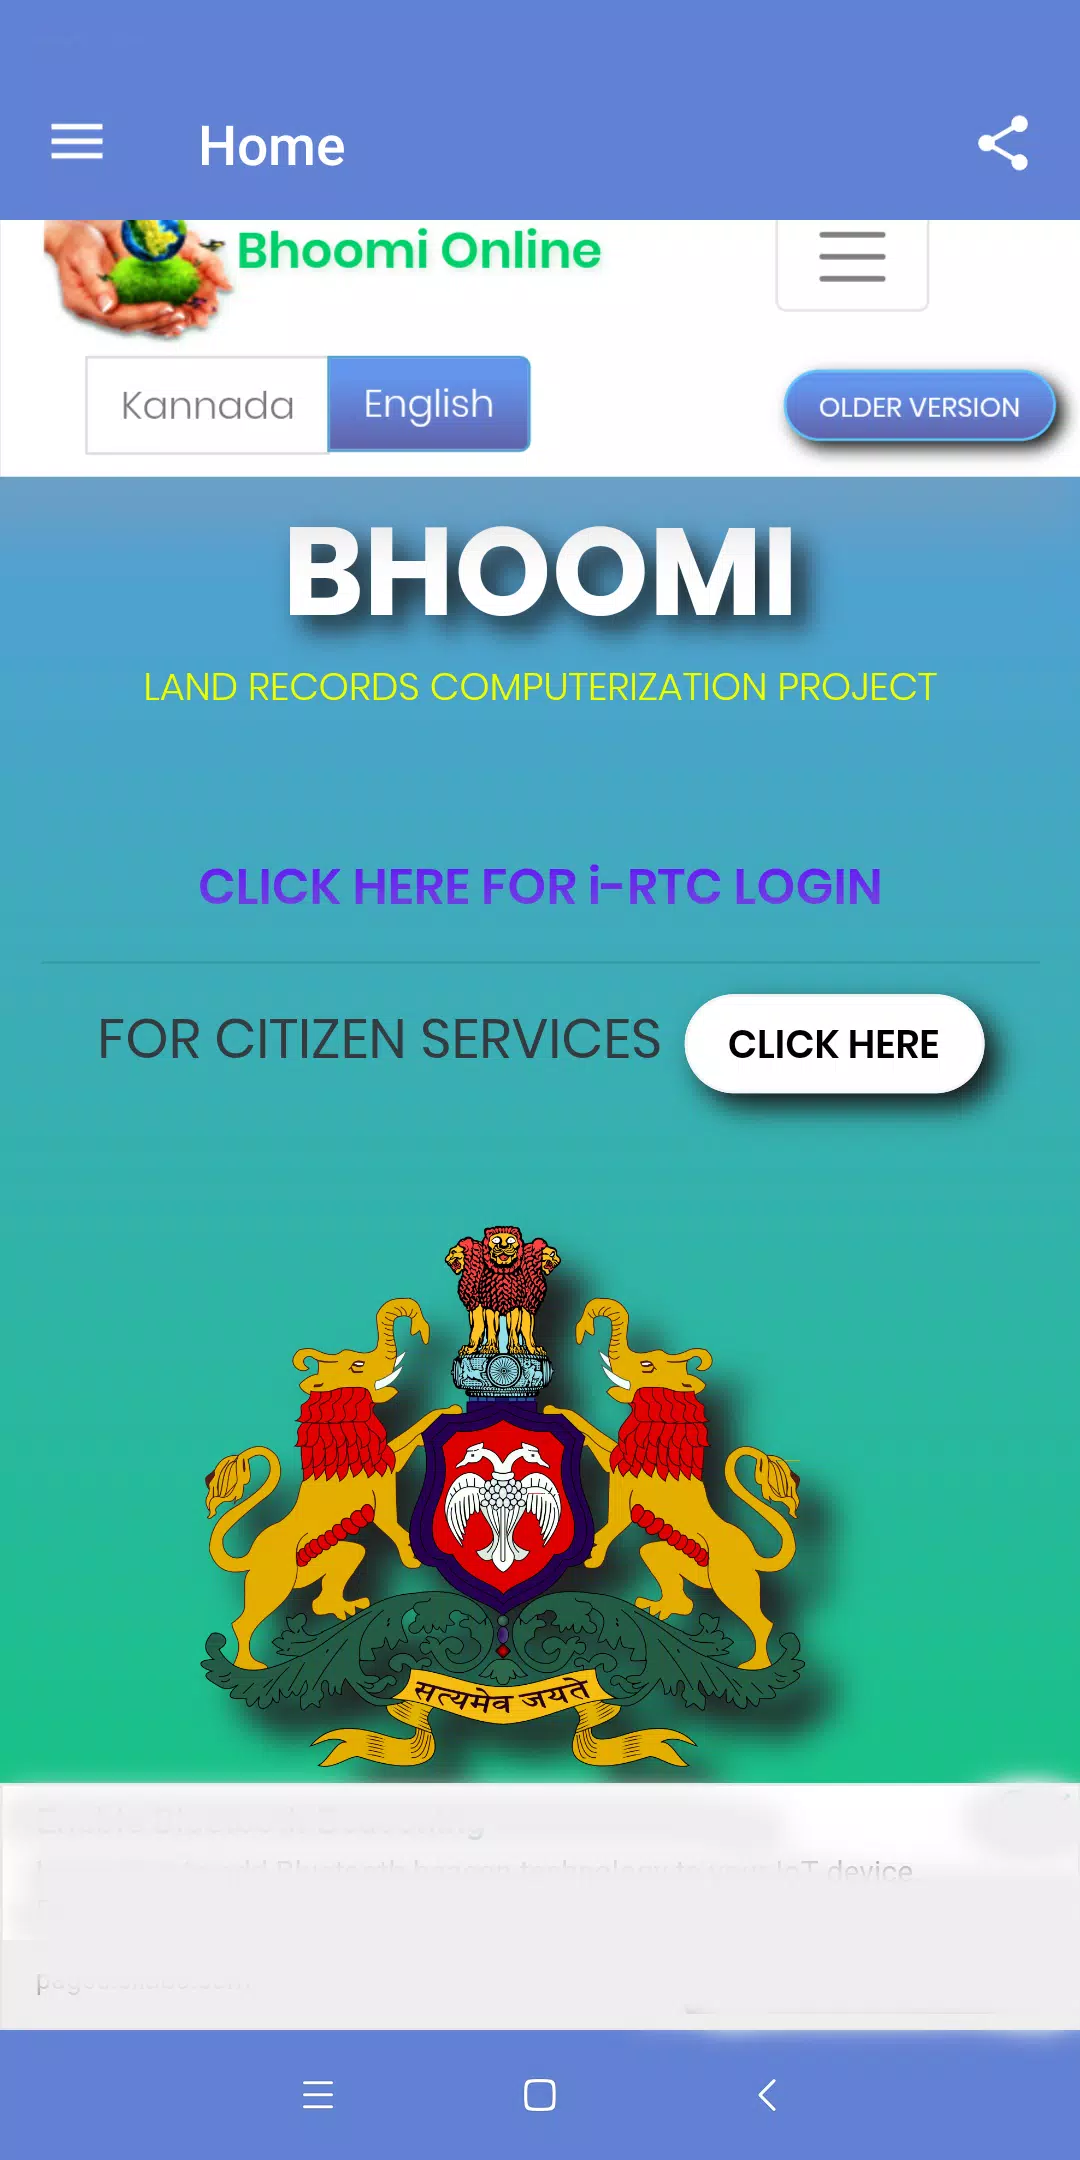 Bhoomi Online MOD APK Download v 3.0 For Android – (Latest Version 3